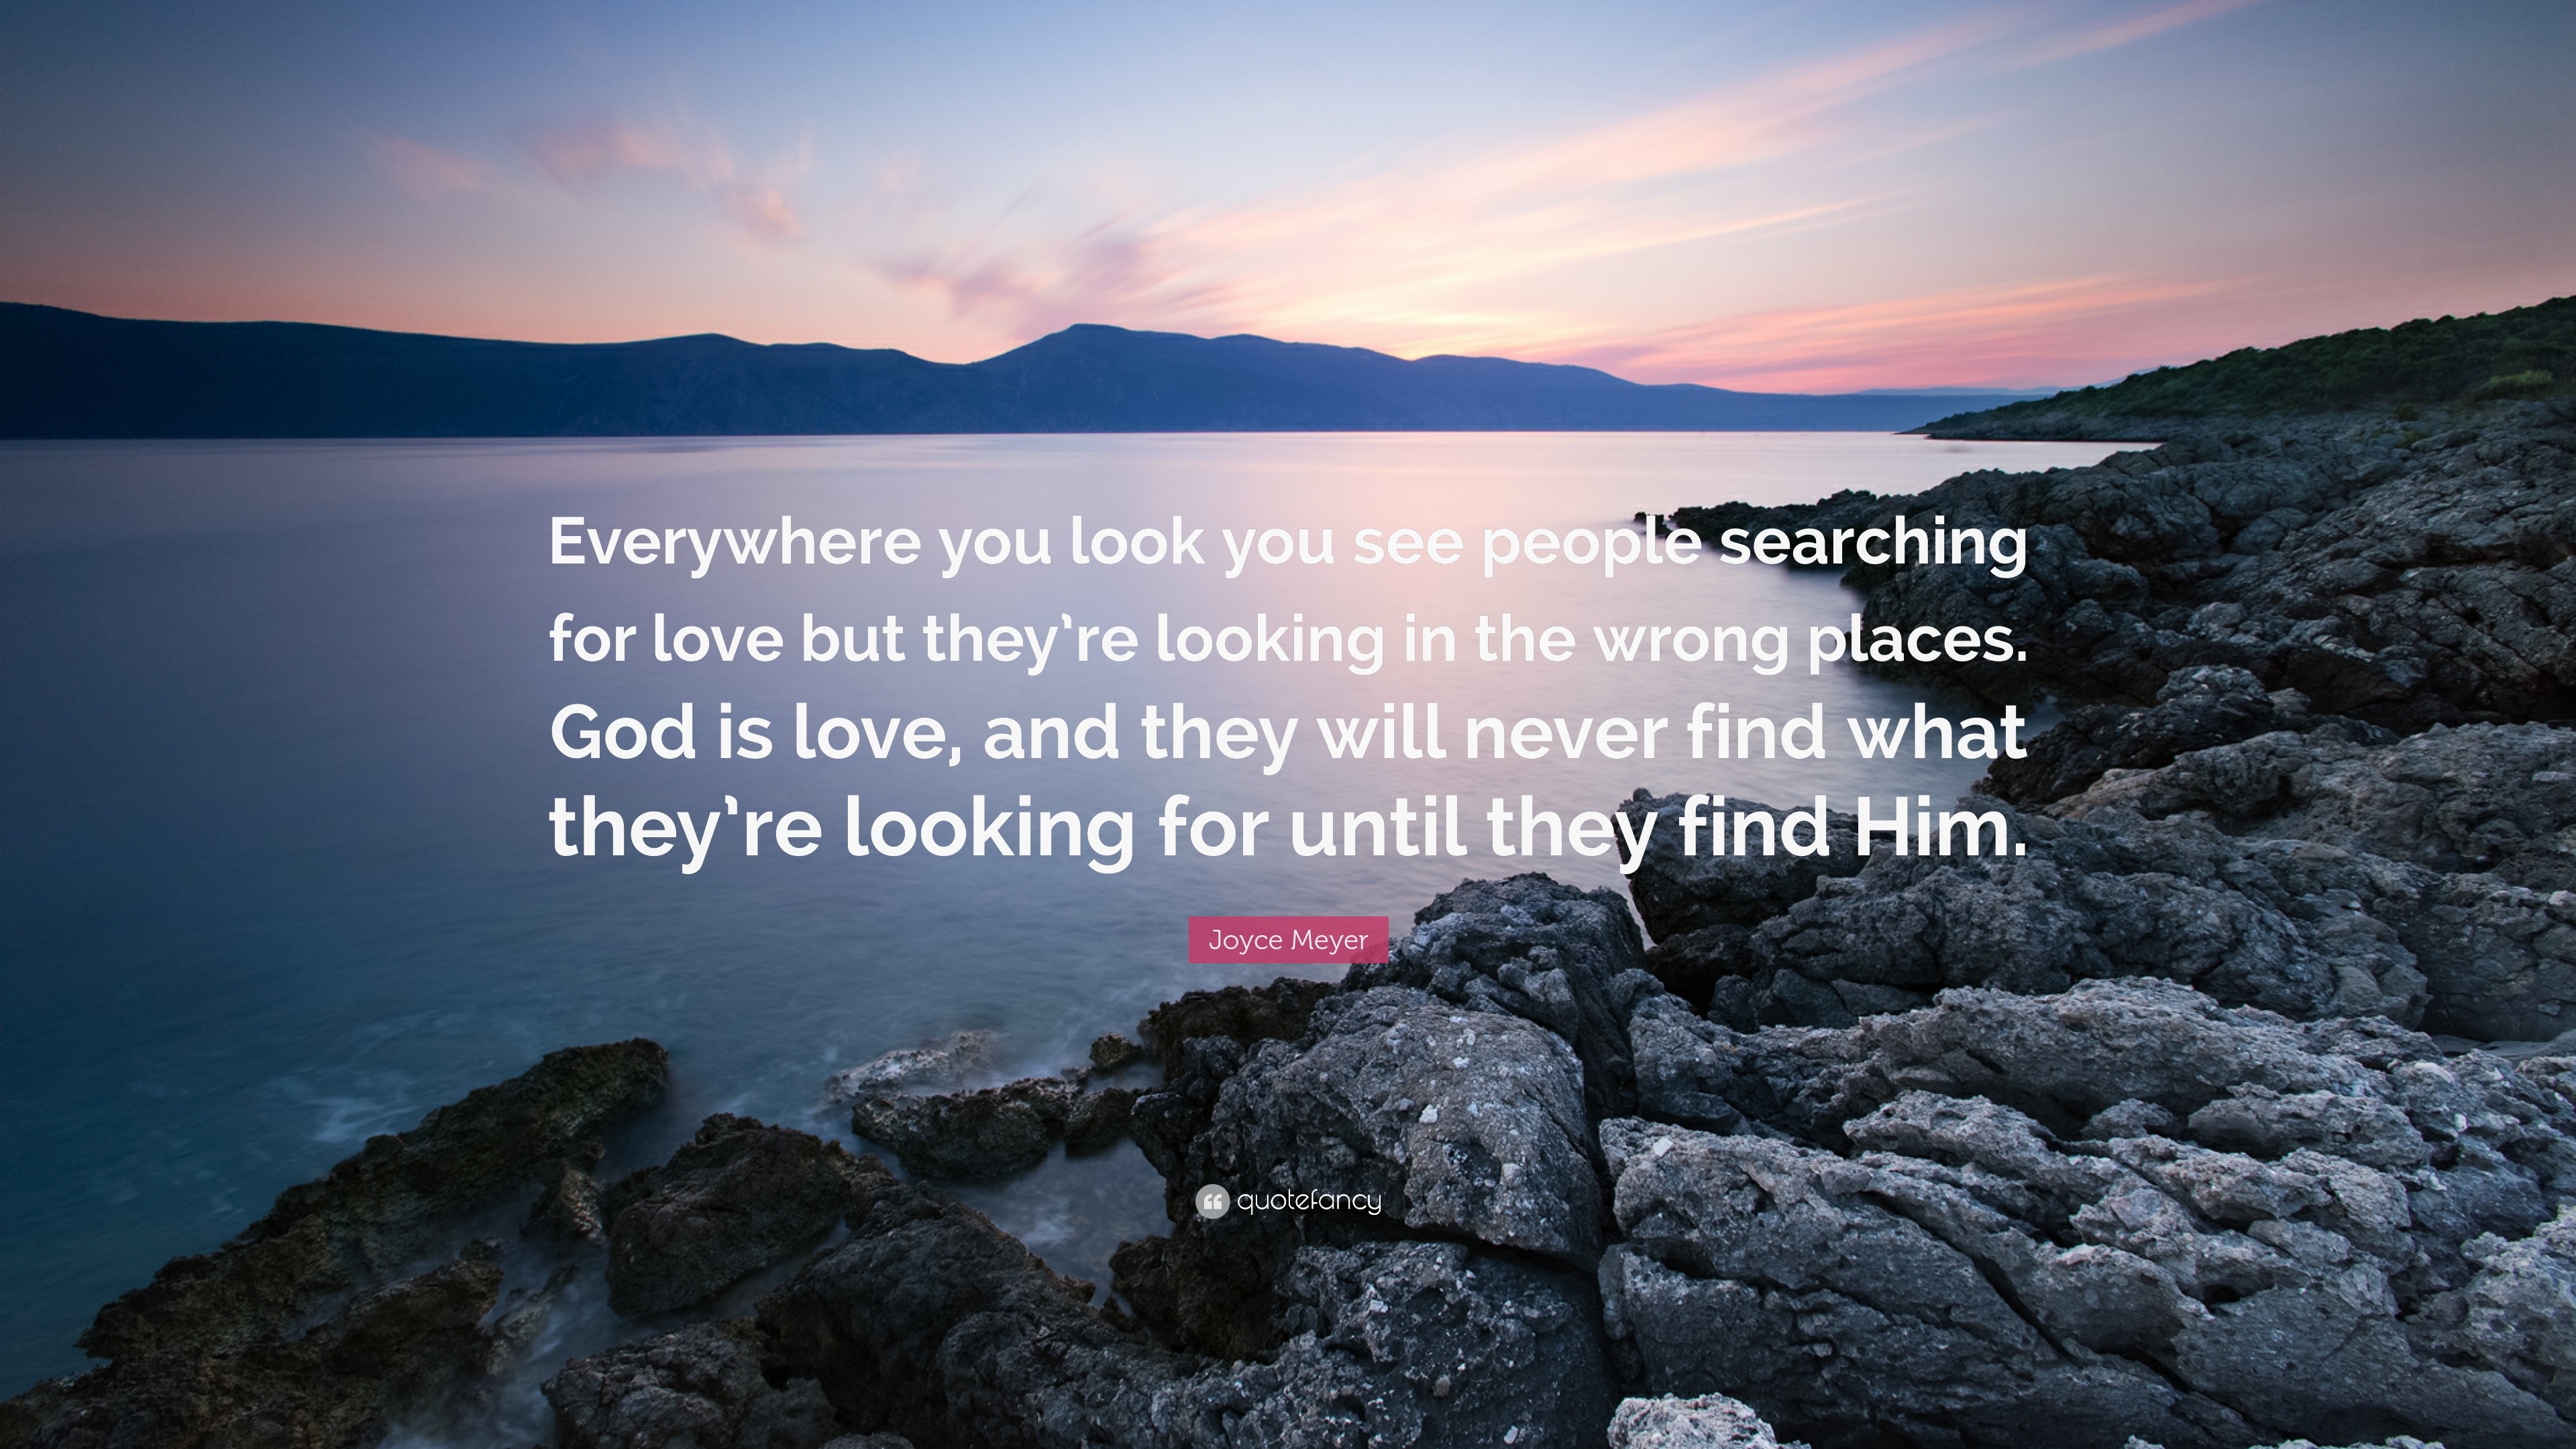 Joyce Meyer Quote “Everywhere you look you see people searching for love but they